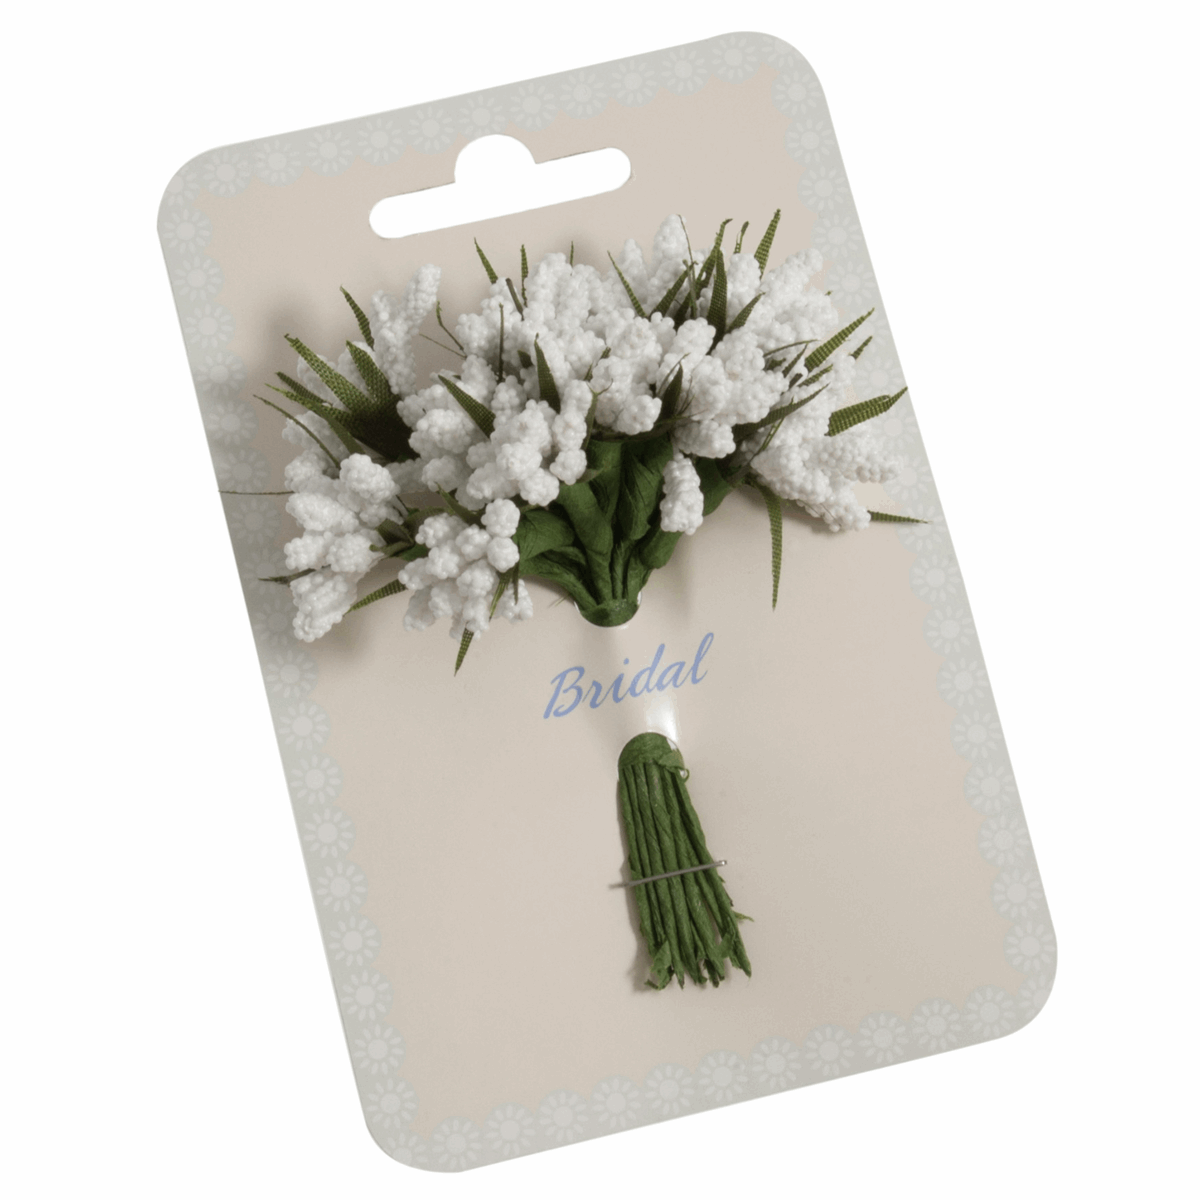 White Grape Hyacinth Bunch - 10mm (Pack of 12 Stems)